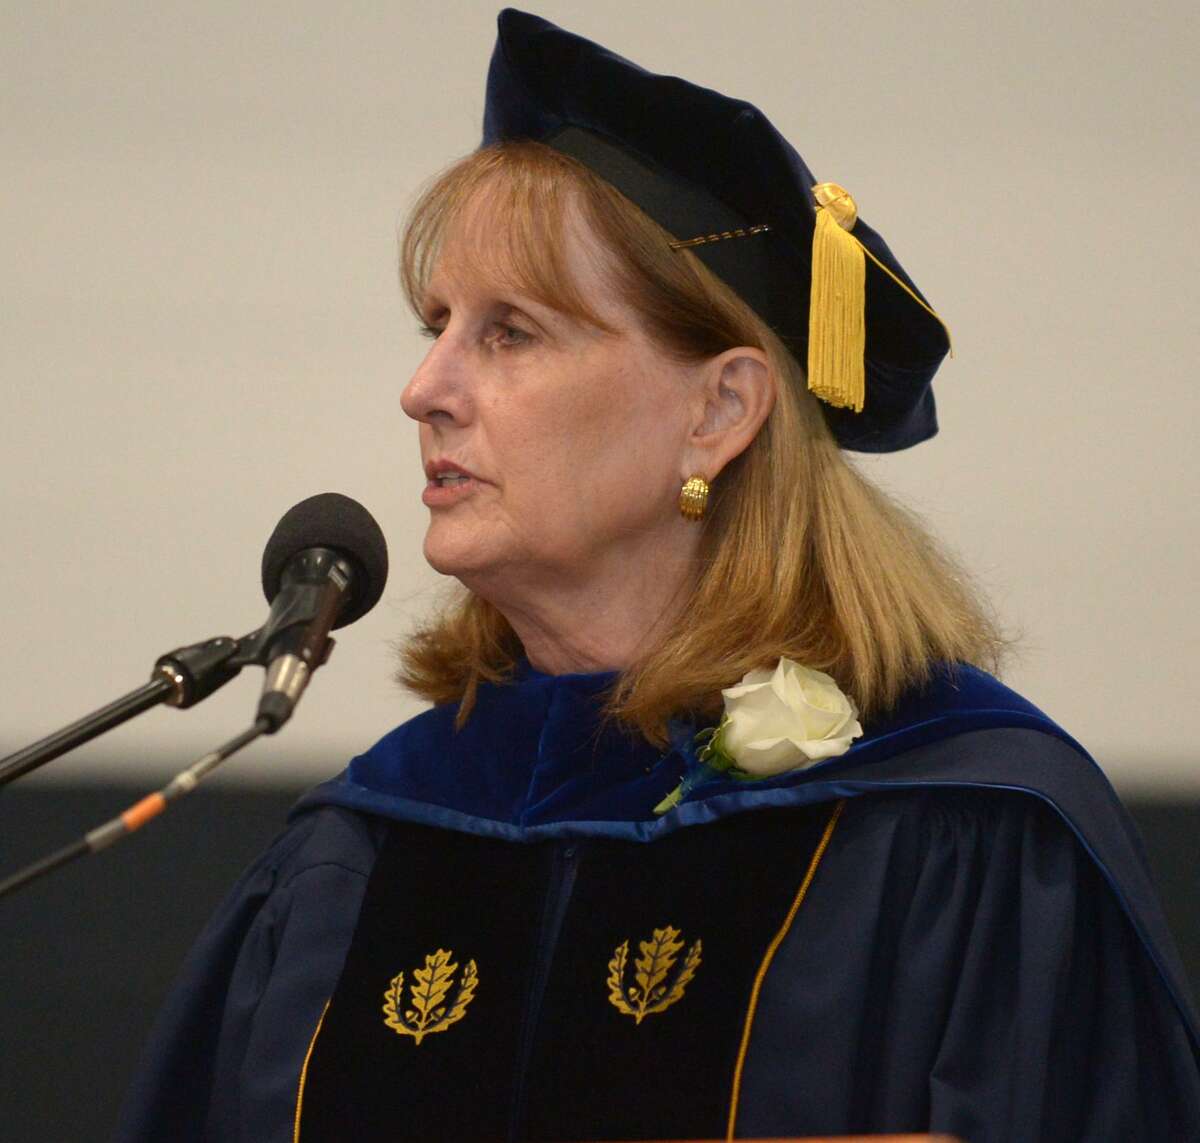 Superintendent of Schools Dr. Colleen Palmer speaks to the graduates during the Staples High School Class of 2018 commencement exercises Friday, June 22, 2018, in Westport, Conn.